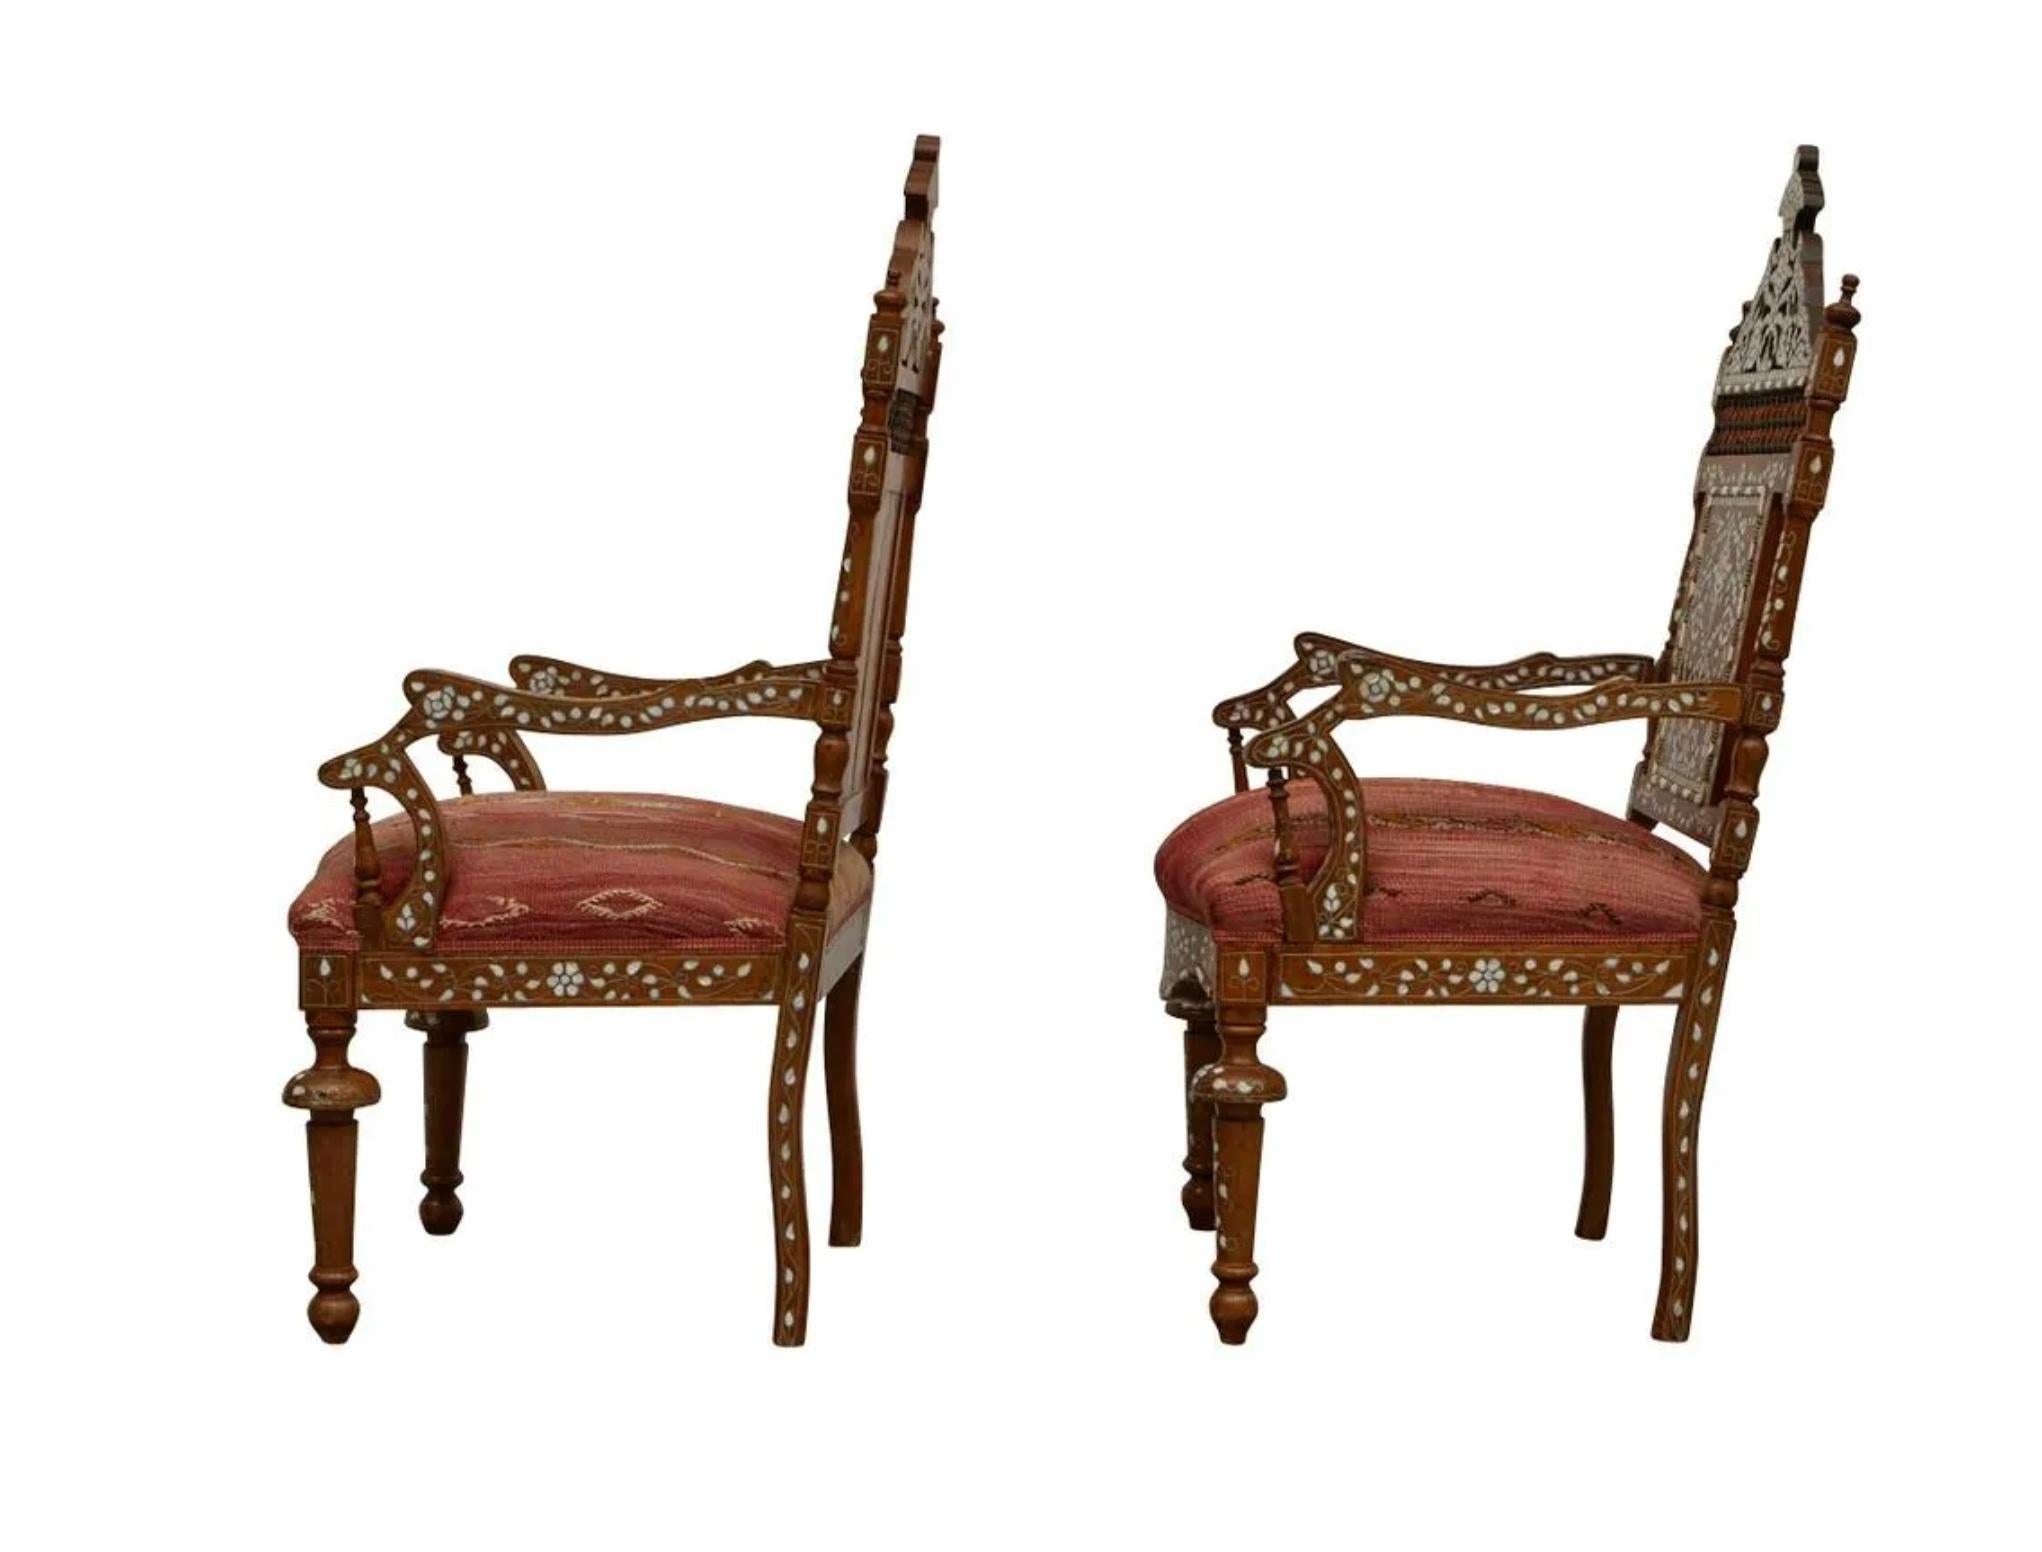 Pair of Syrian mother-of-pearl inlaid wooden armchairs. Richly decorated with floral motifs in mother of pearl utilizing the intarsia method. With matching upholstered seats.

Provenance: From the Estate of Horst Rechelbacher, Osceola,